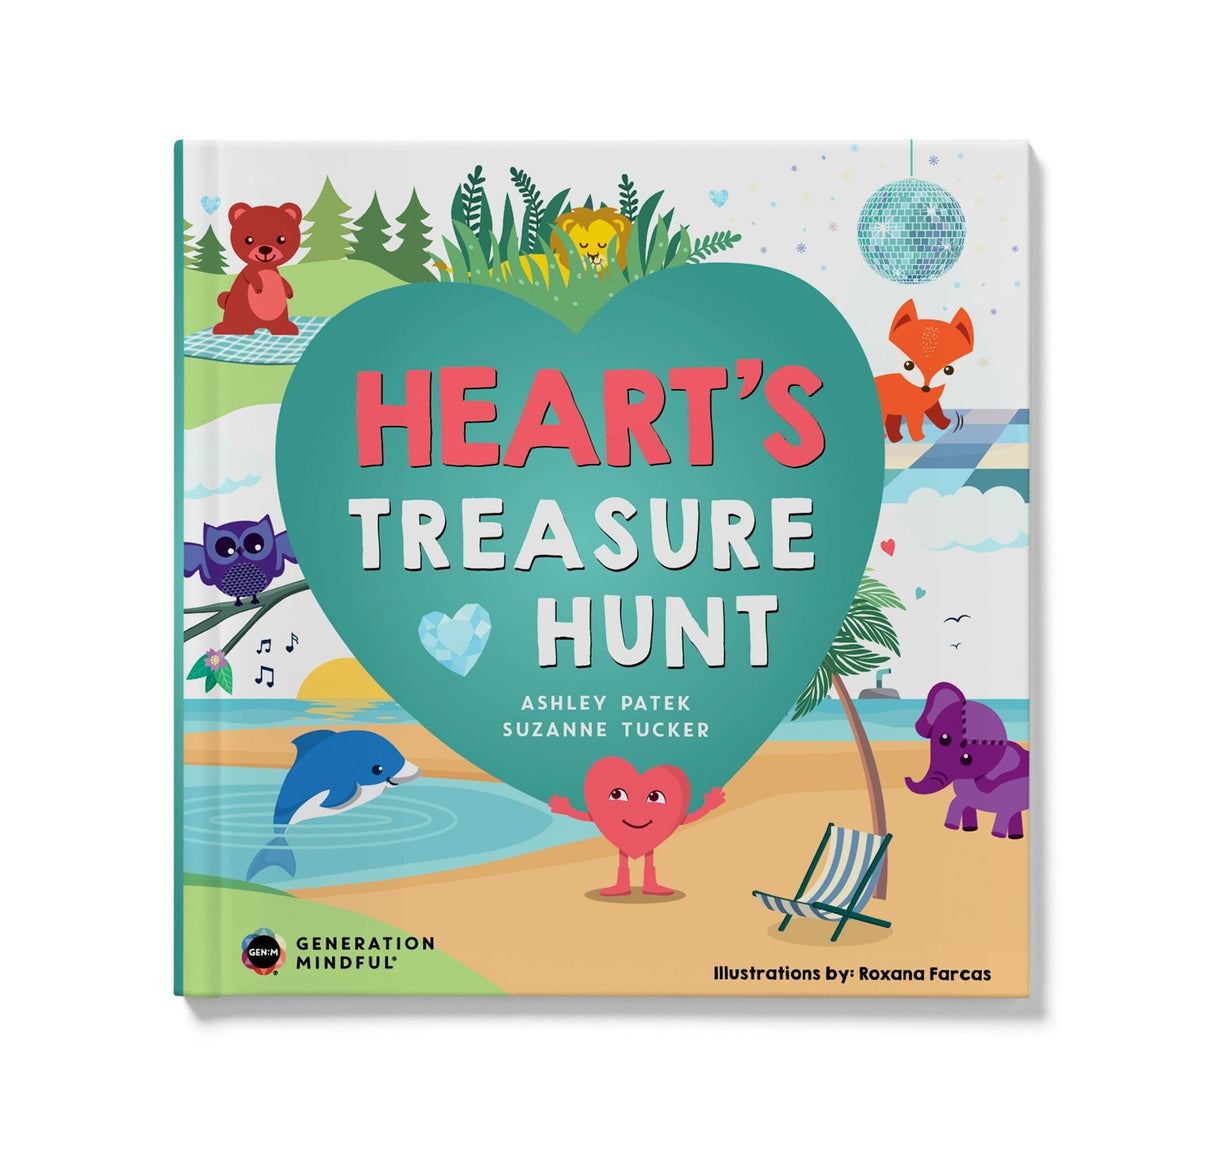 Heart's Treasure Hunt by Generation Mindful